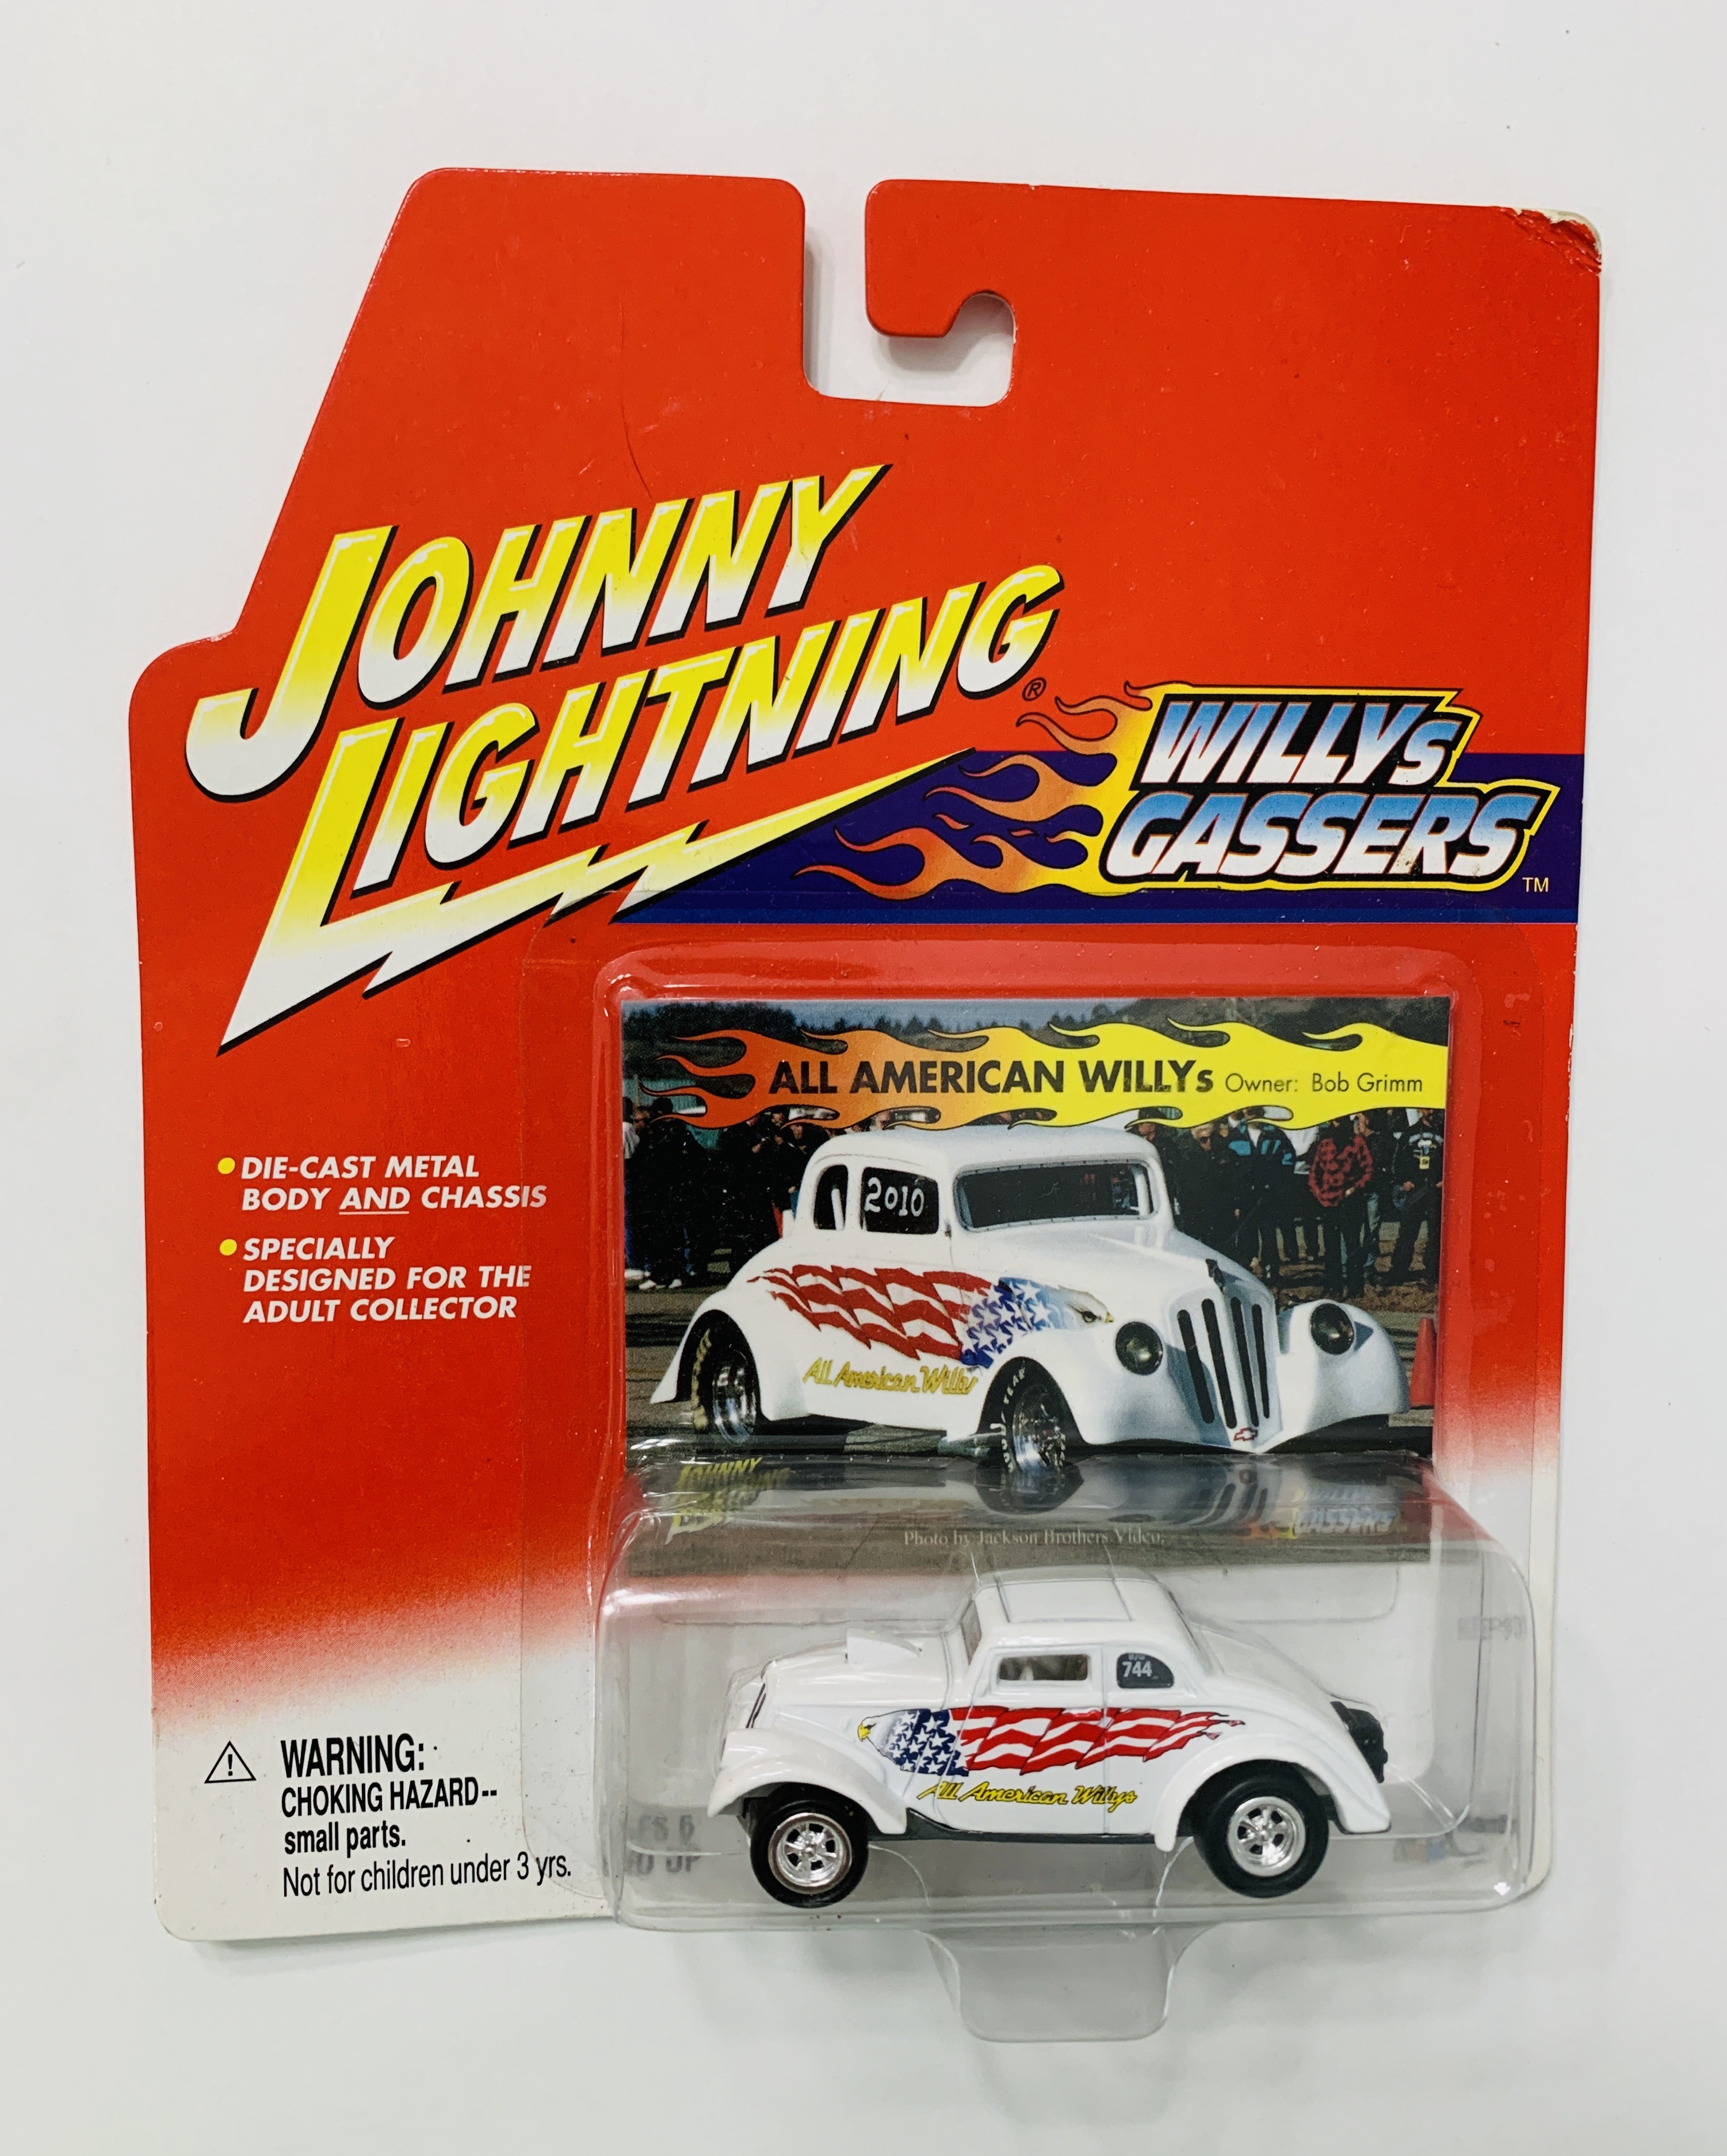 Johnny Lightning Willys Gasssers All American Willys Bob Grimm